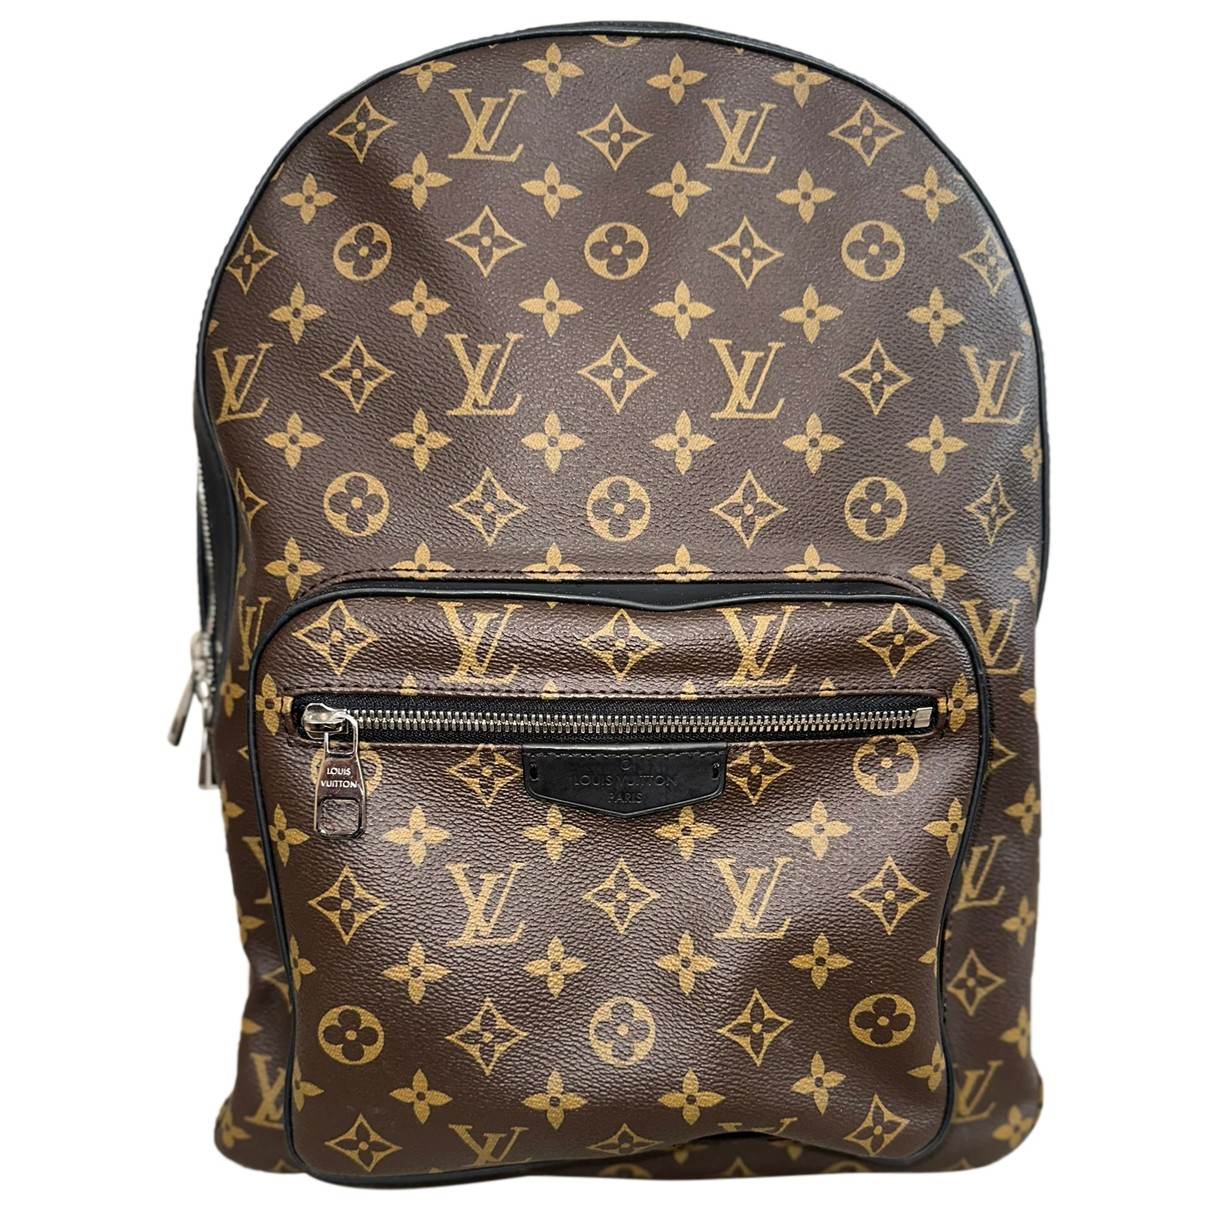 Louis Vuitton 2019 Discovery Backpack - Farfetch